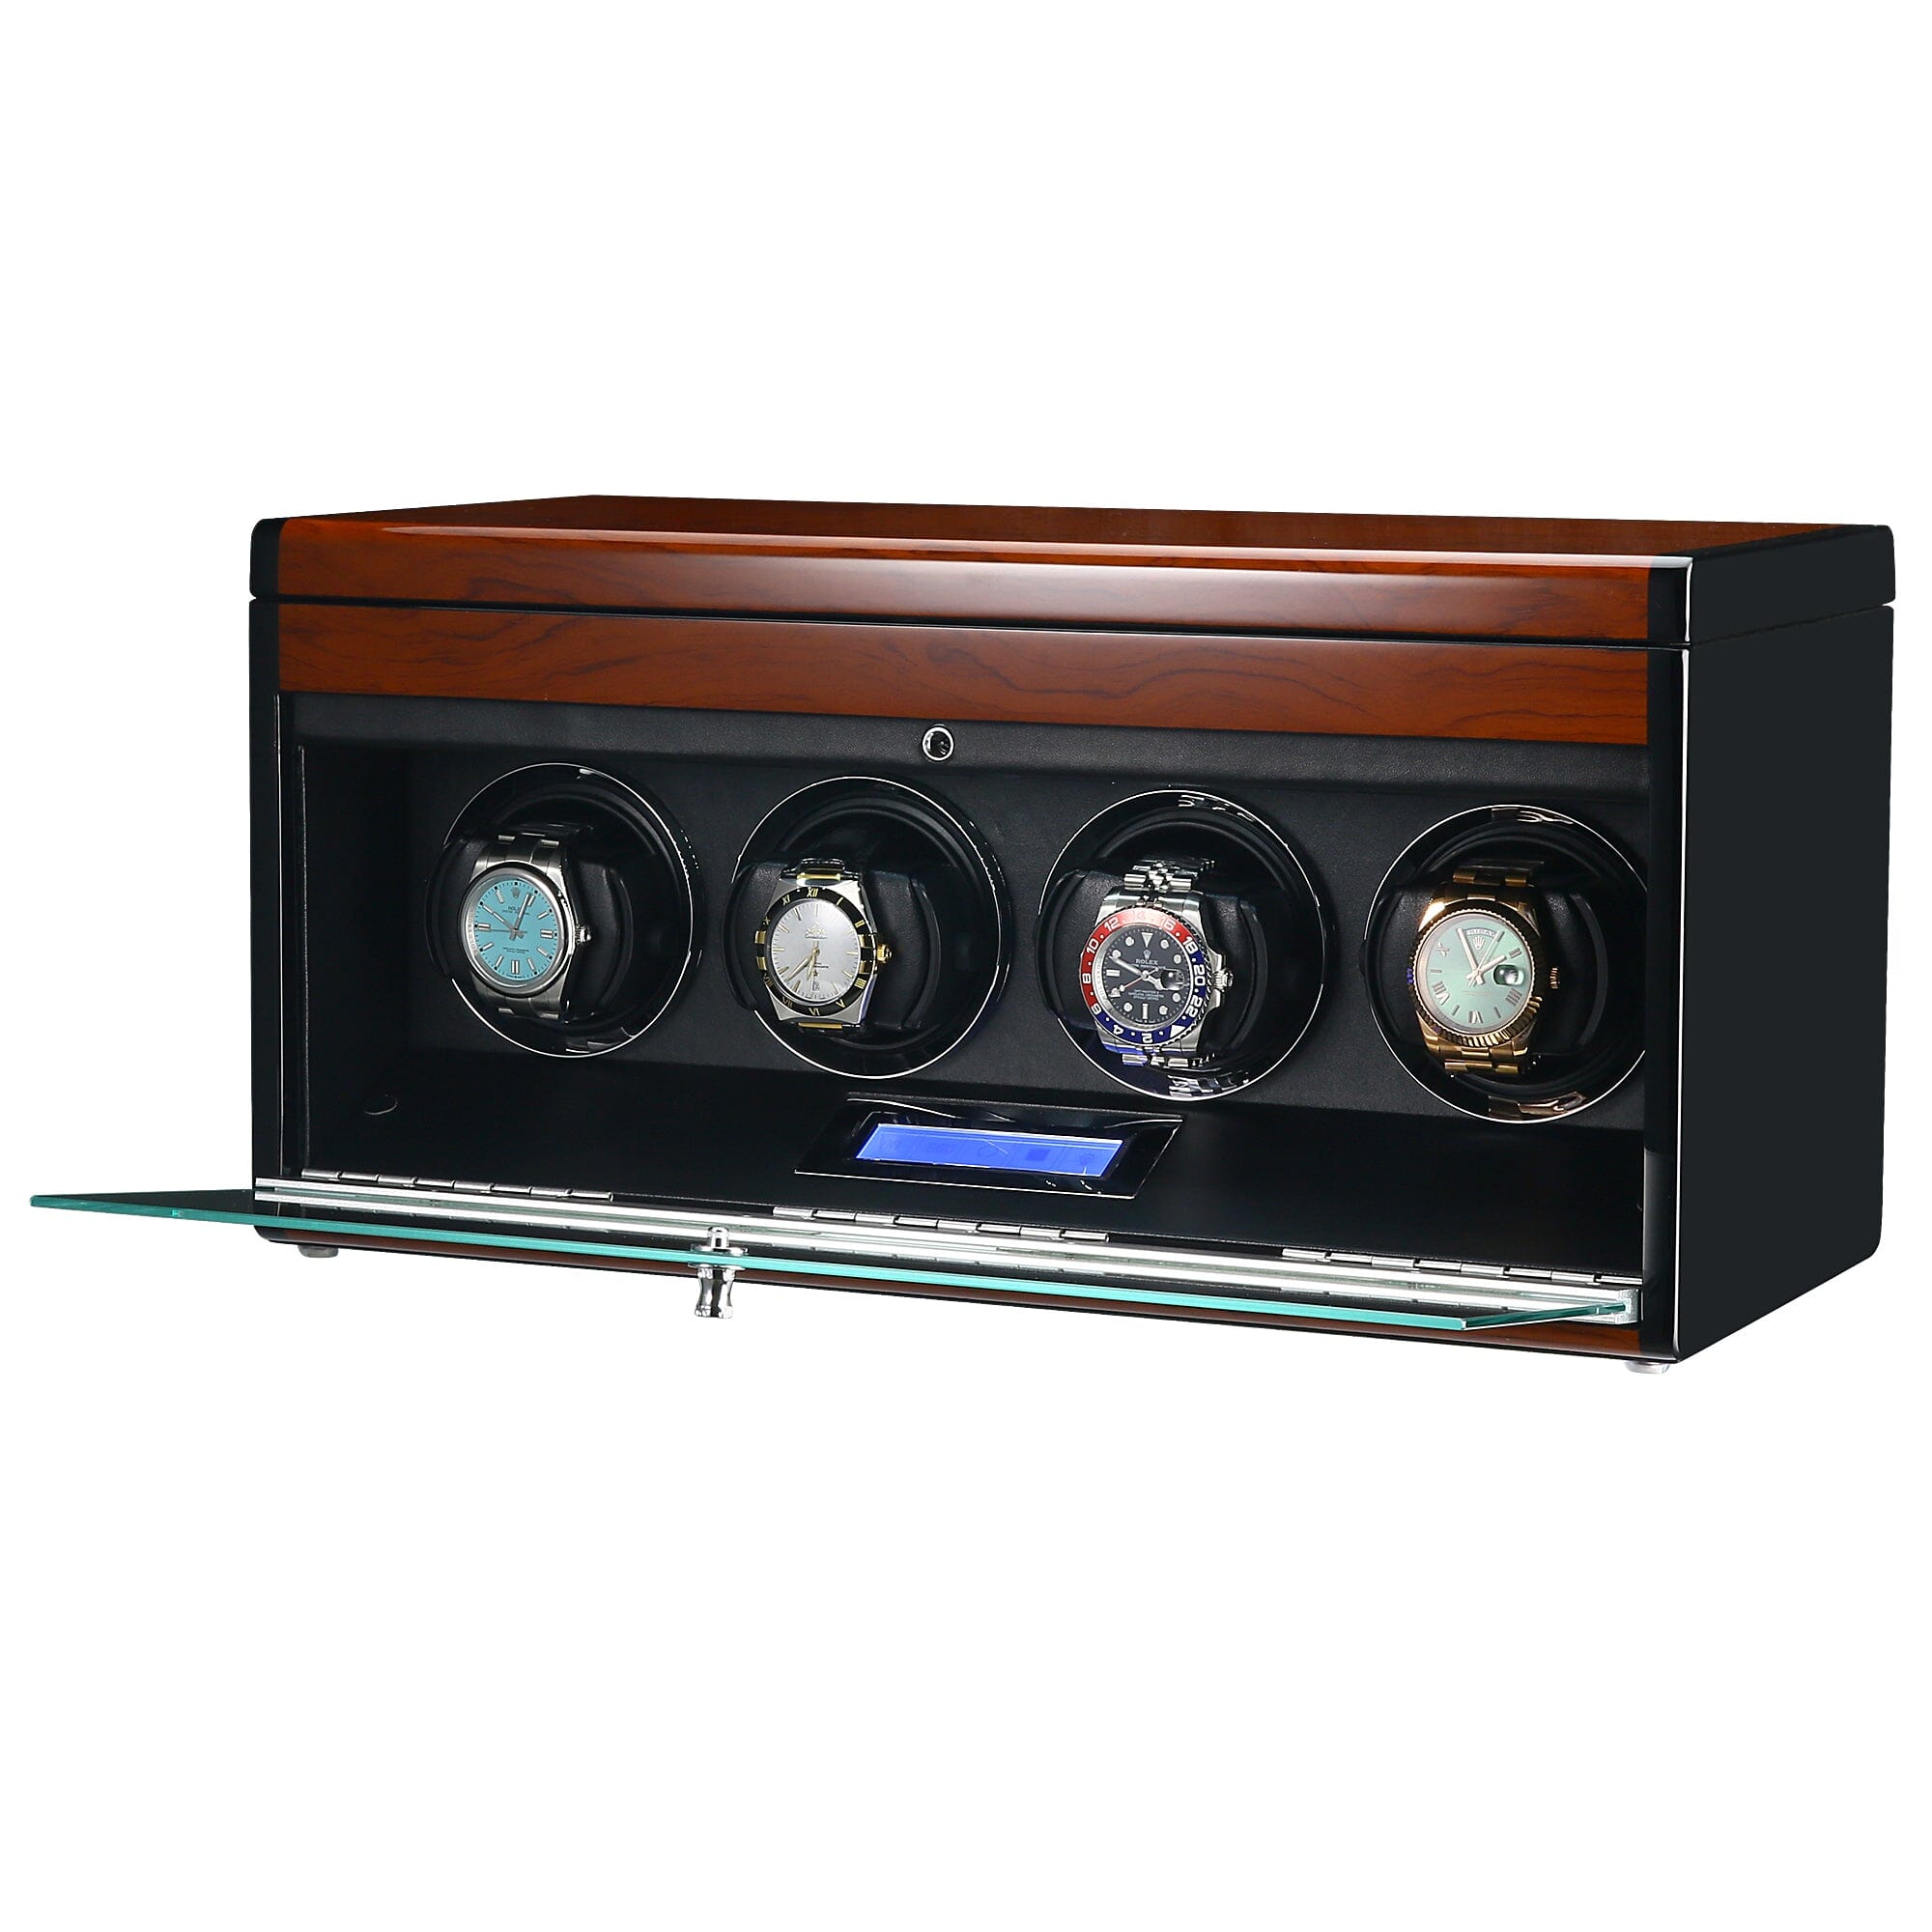 Vancouver Watch Winder for 4 Wood Grain Watch Winder Boxes Clinks 